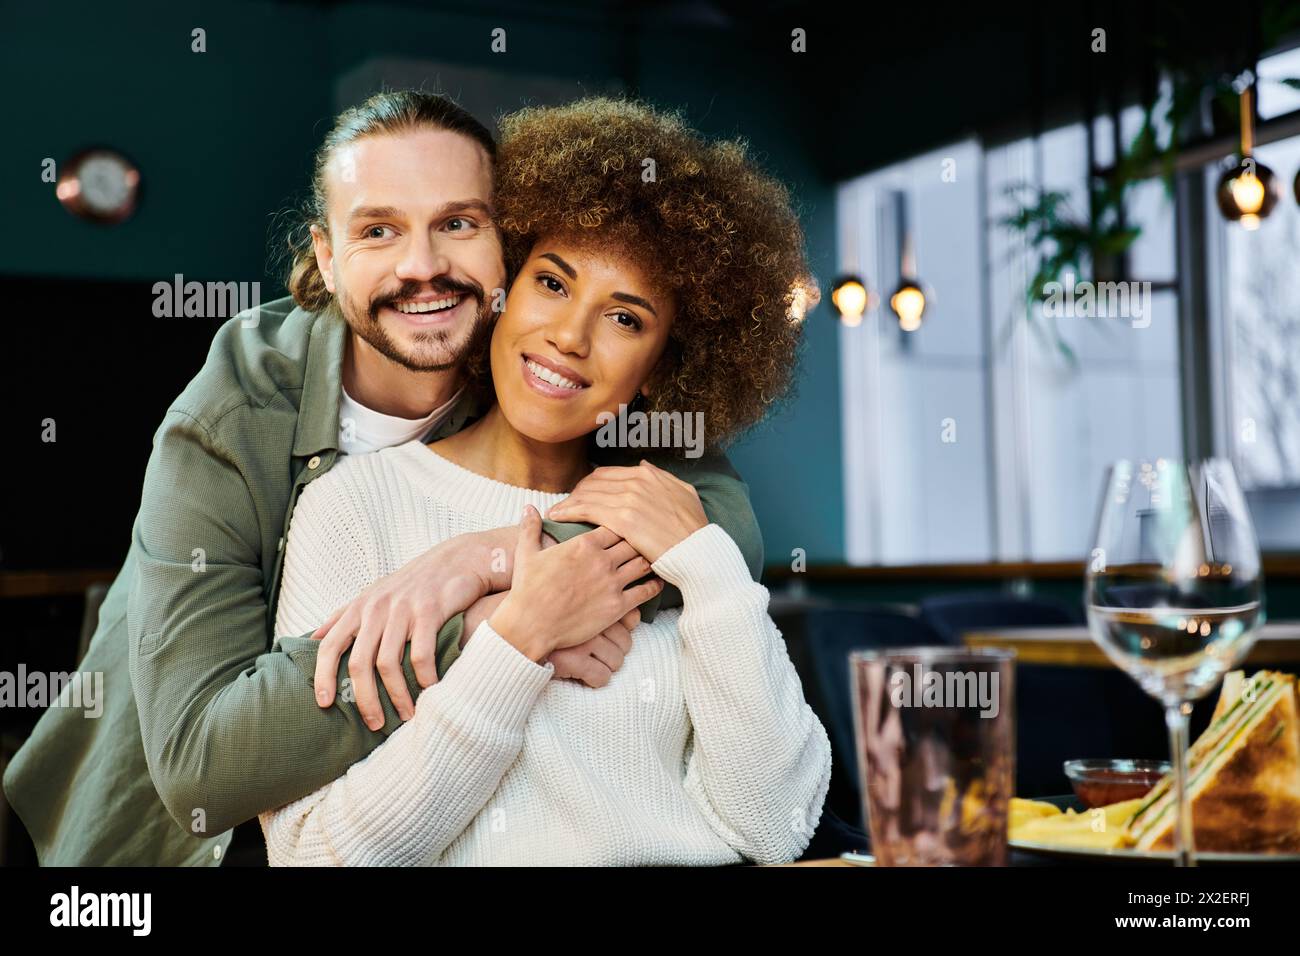 An African American woman and man share a tender hug in a modern cafe setting. Stock Photo